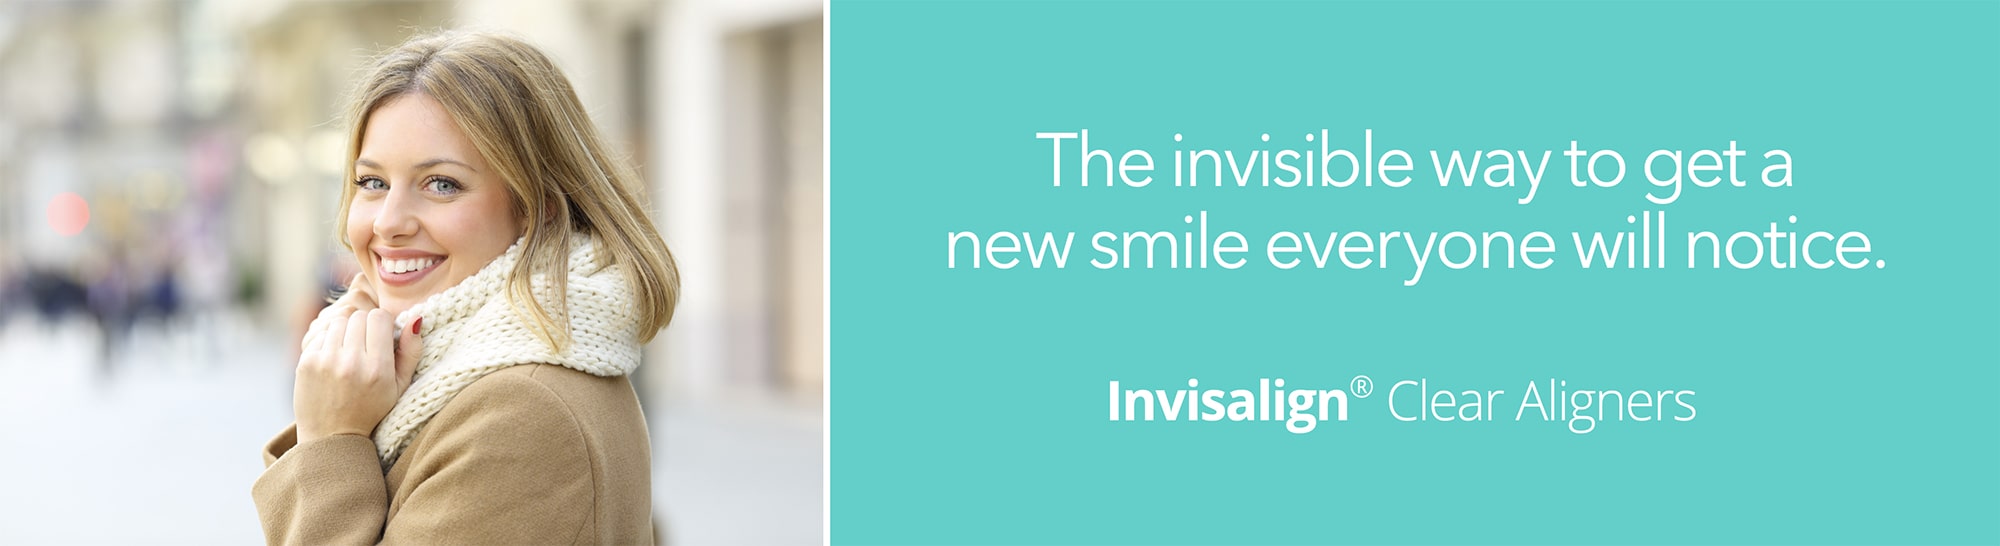 invisalign day banner - learn more